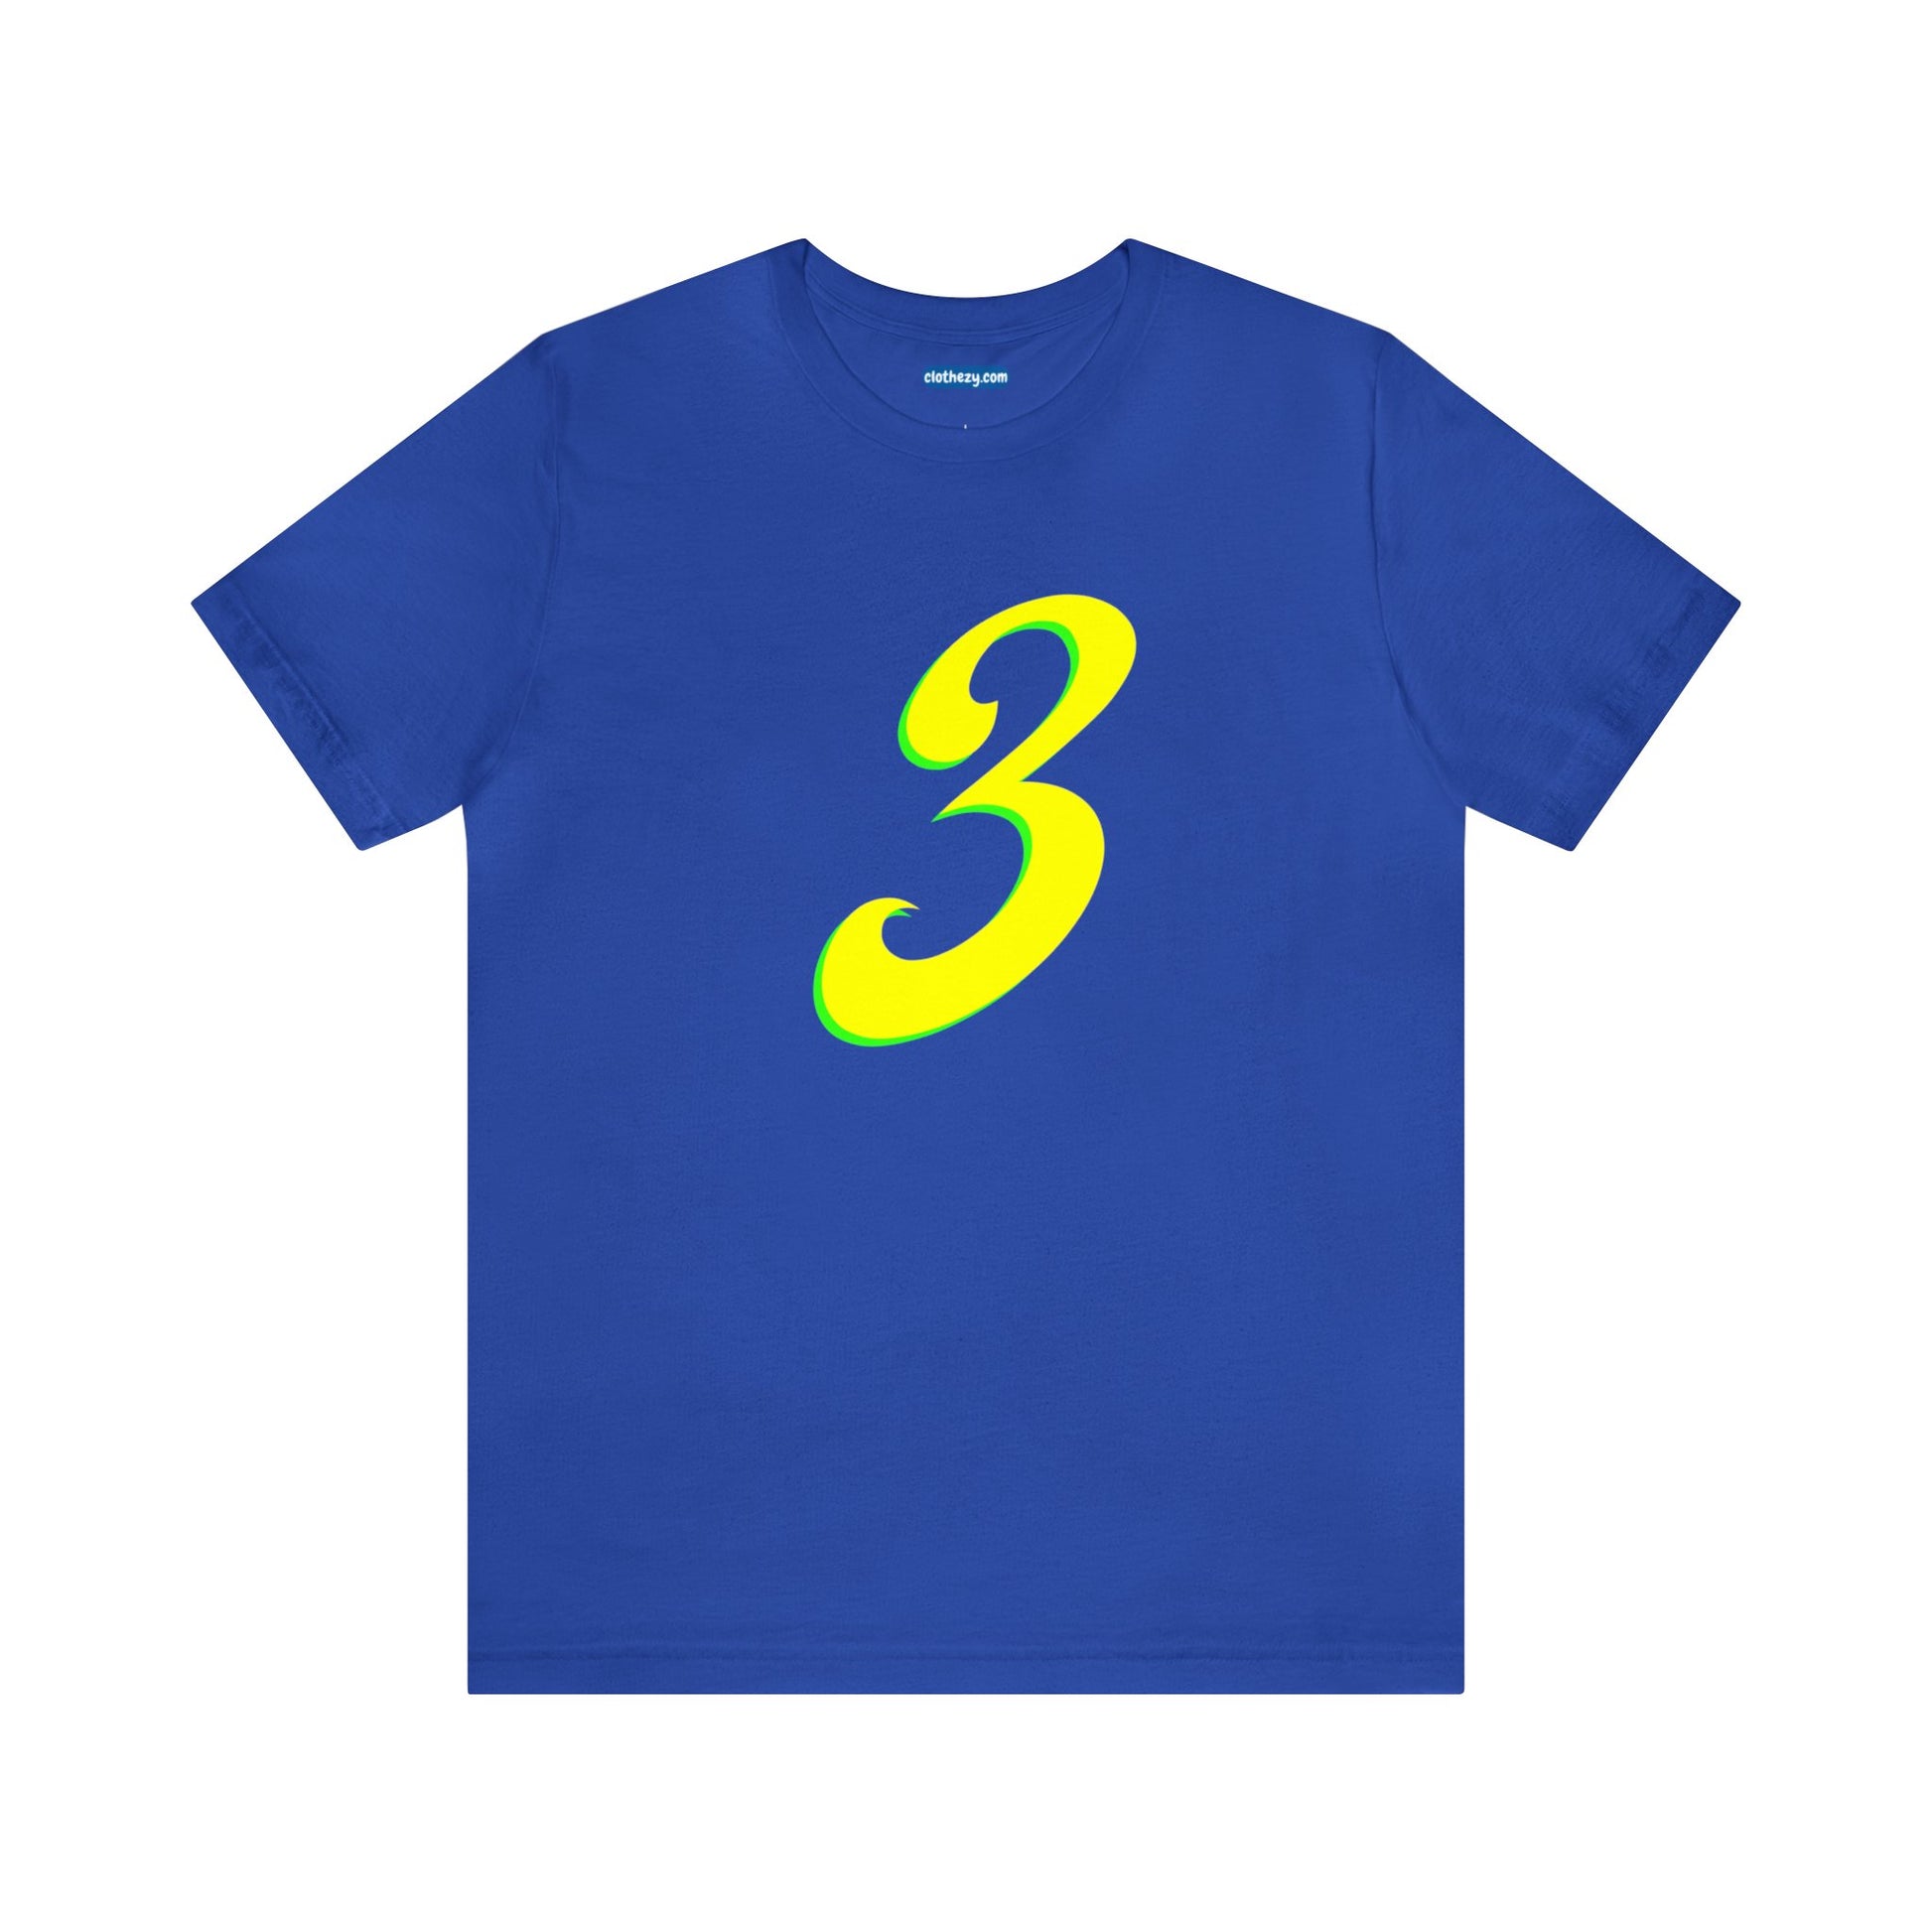 Number 3 Design - Soft Cotton Tee for birthdays and celebrations, Gift for friends and family, Multiple Options by clothezy.com in Royal Blue Size Small - Buy Now